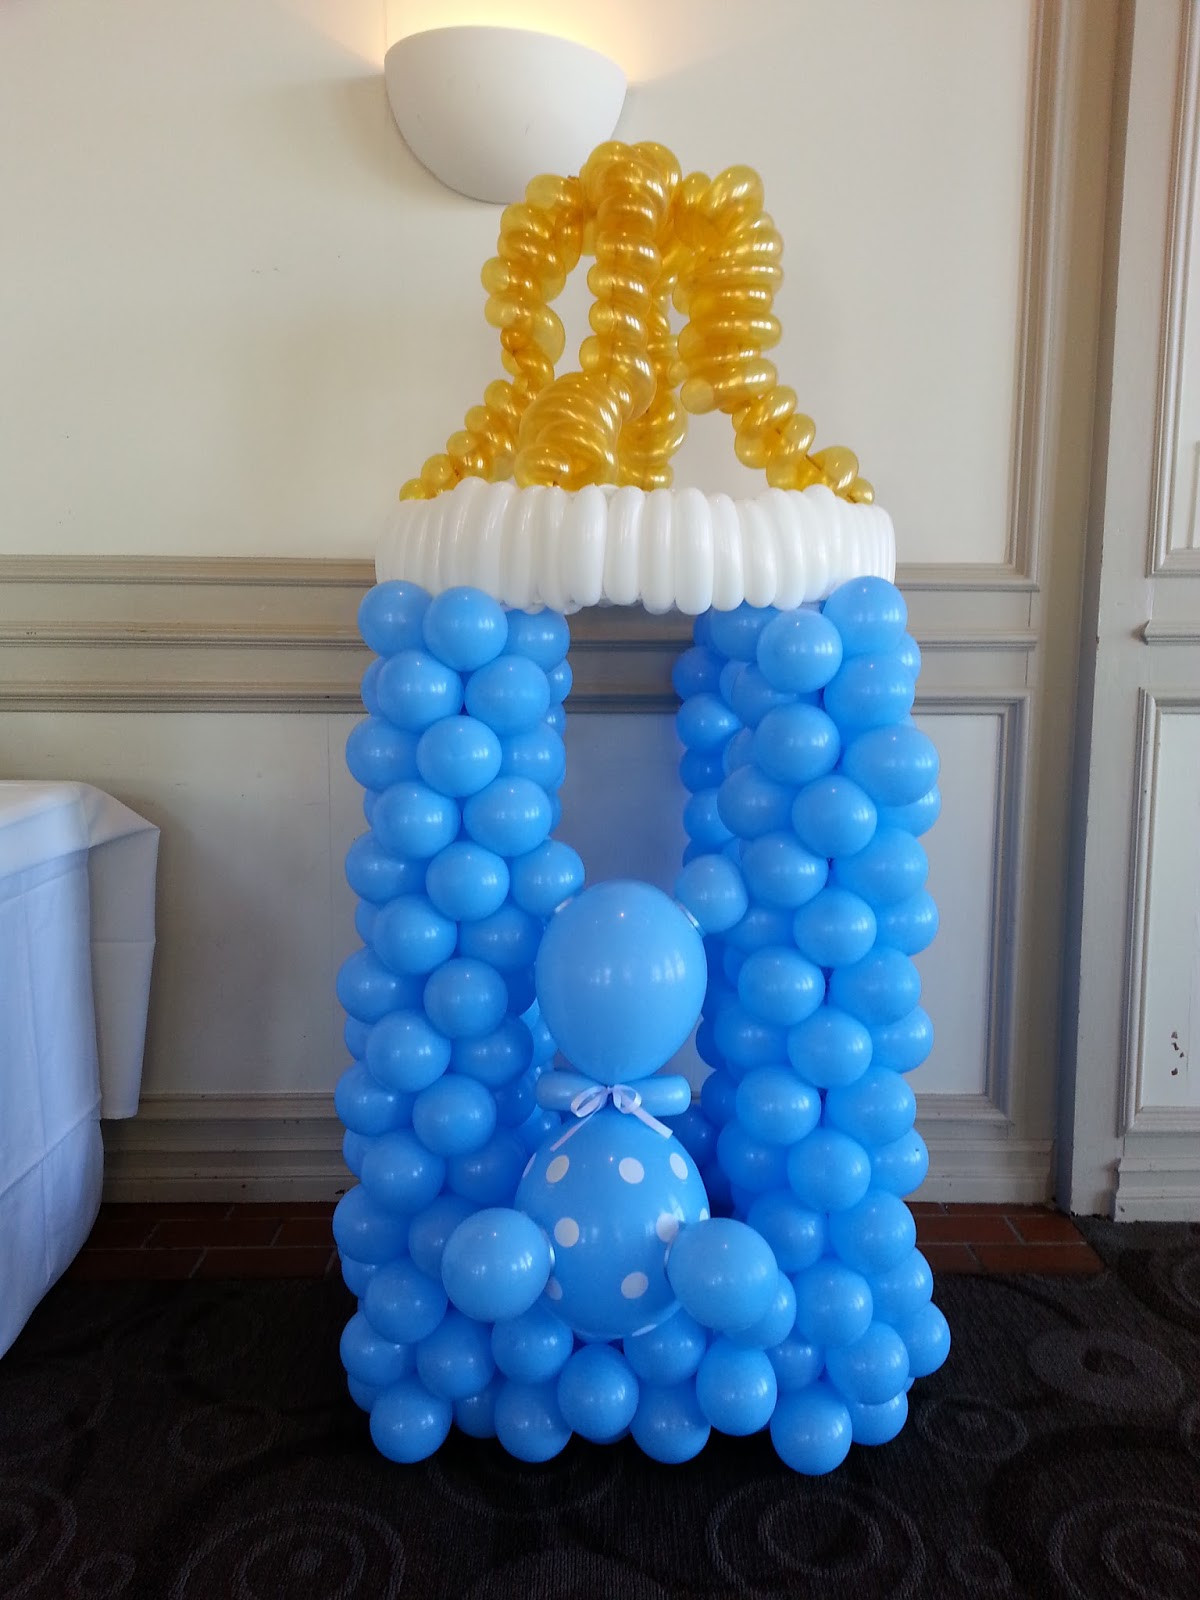 Boy Baby Shower Decor
 PoP Balloons A baby shower for a boy